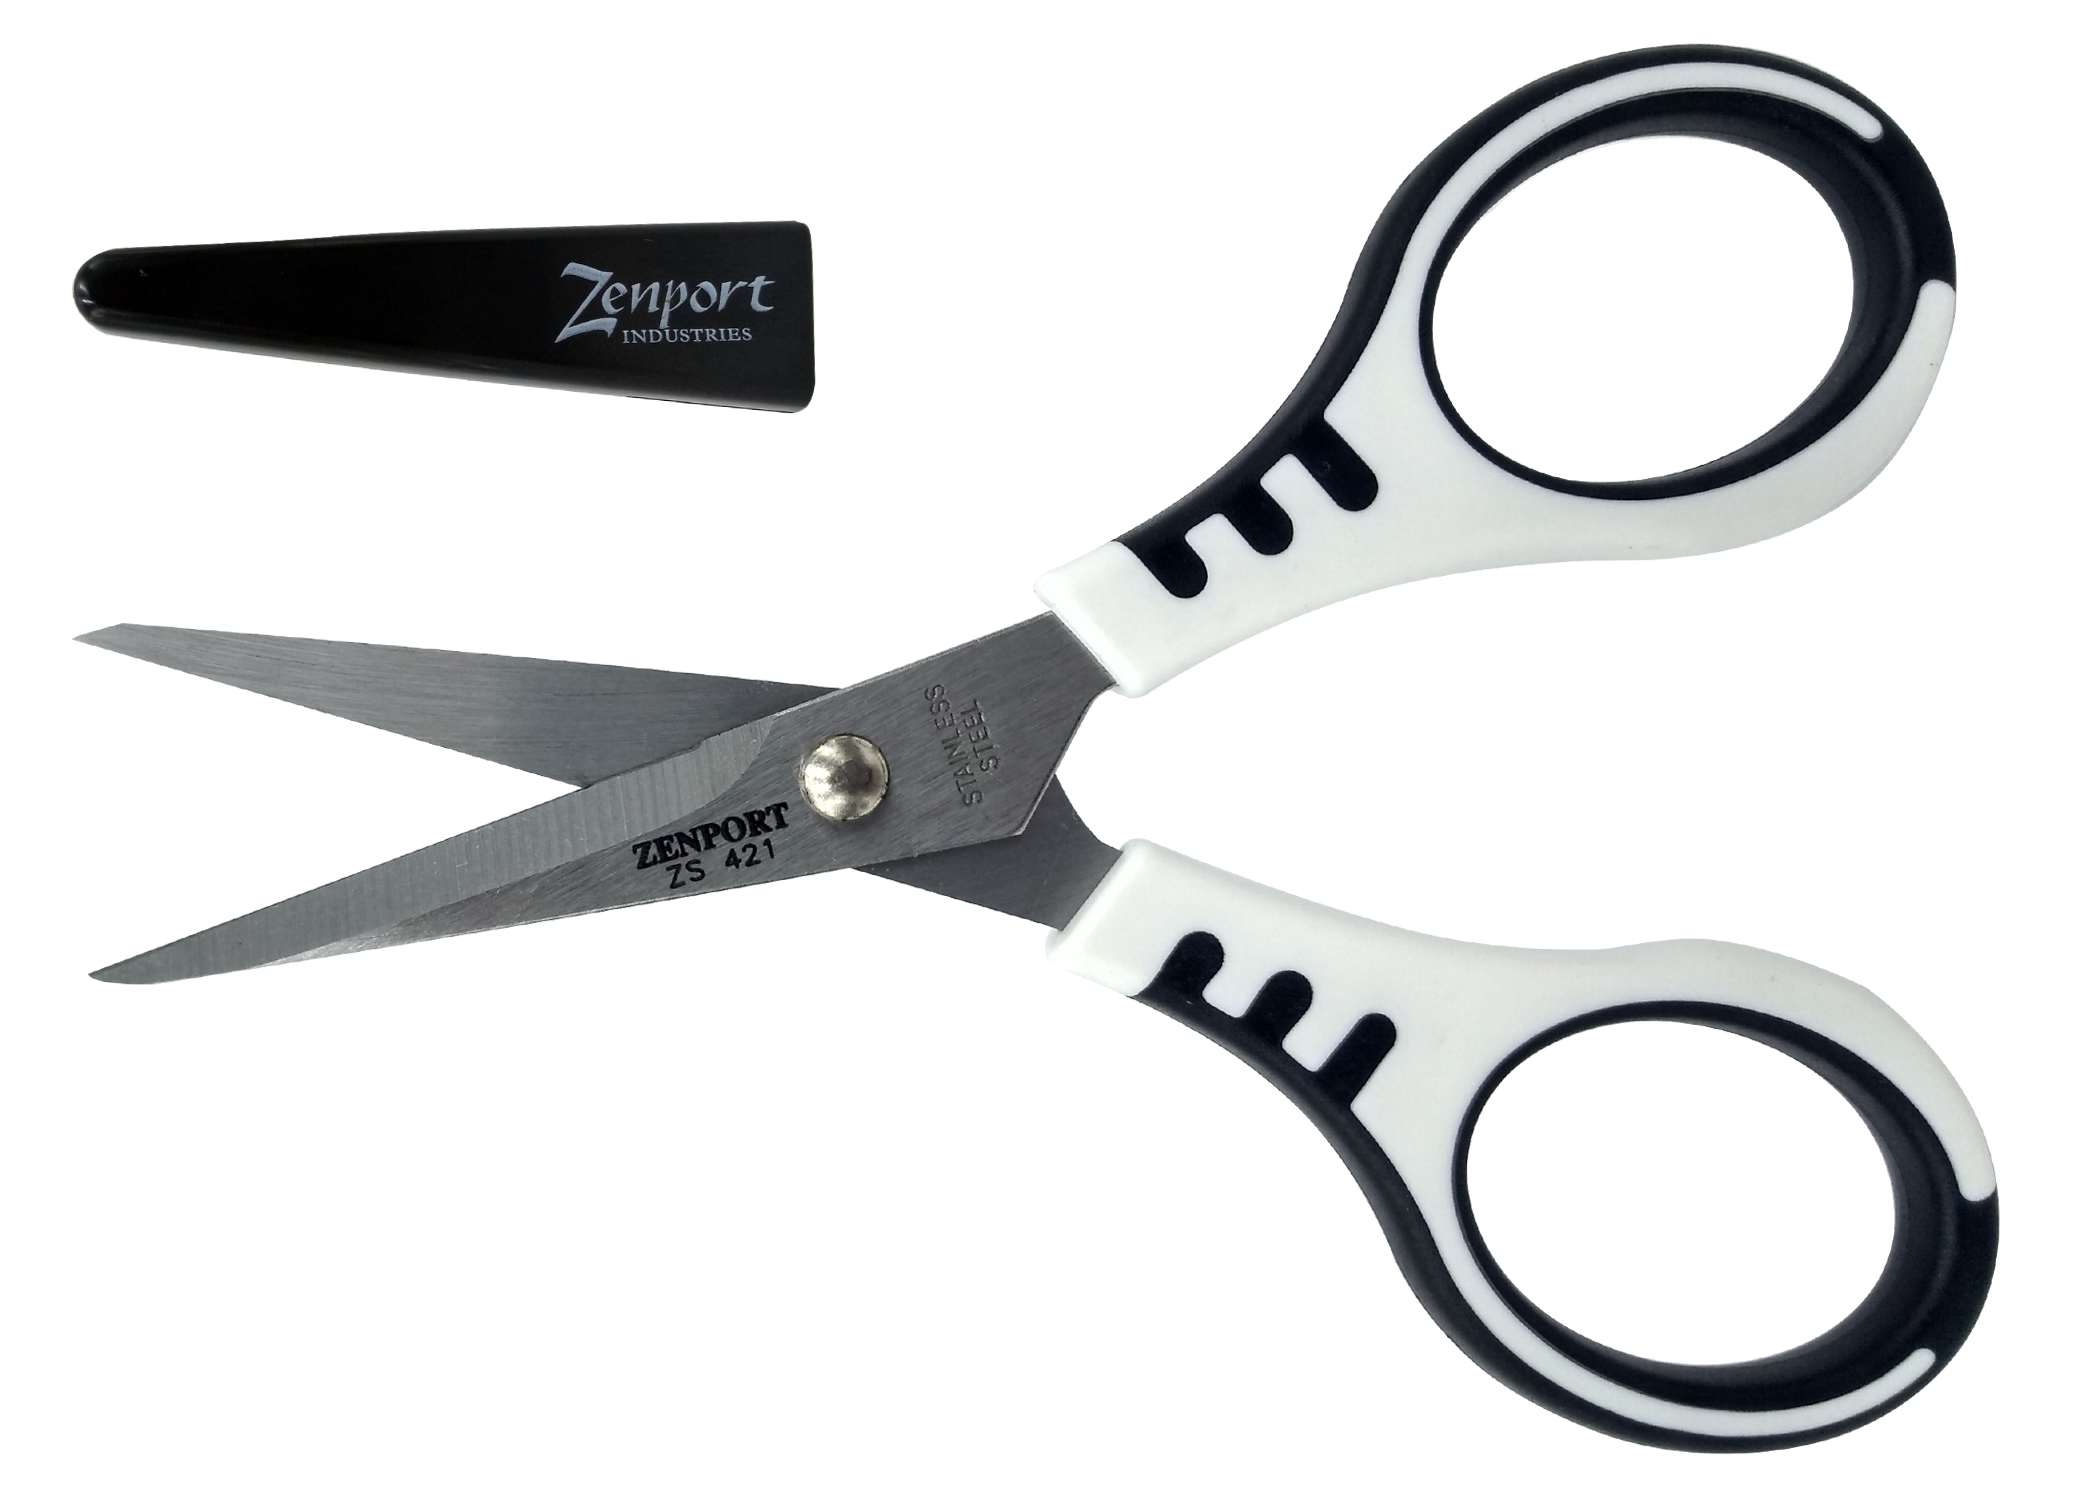 Zenport ZS421 Scissors, Trimmer Bee, 5.25-inch long, Stainless, Safety Cap